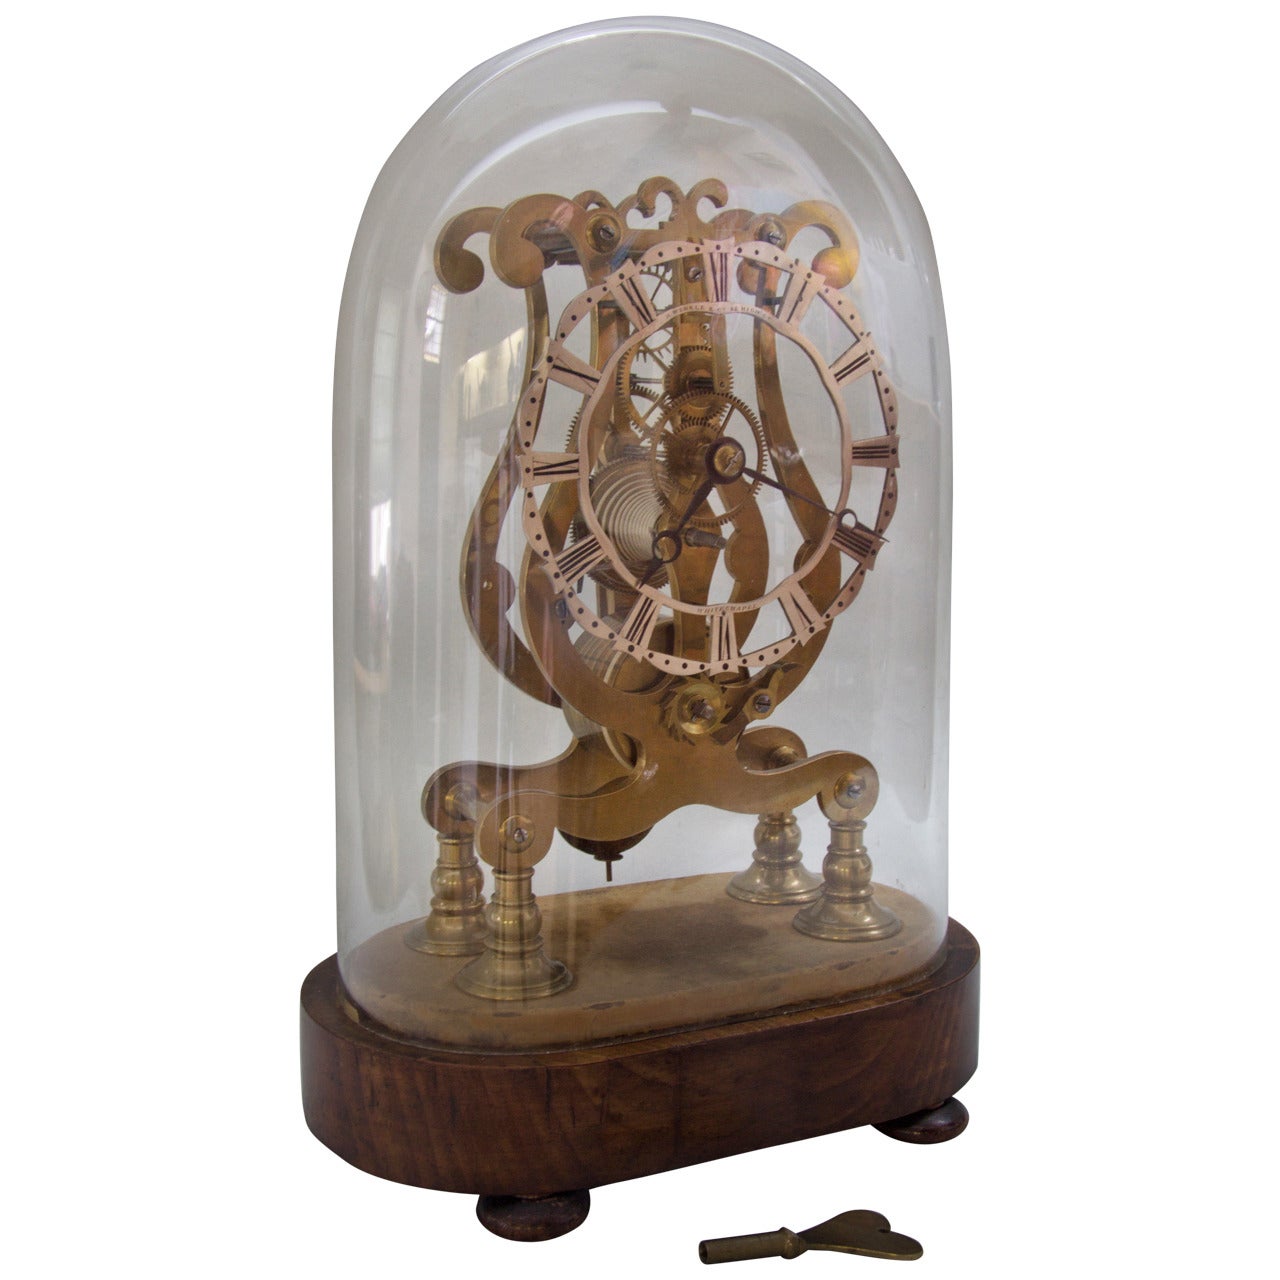 English Fusee Skeleton Clock Signed "H Wehrle & Co, 82 High St, Whitechapel" For Sale